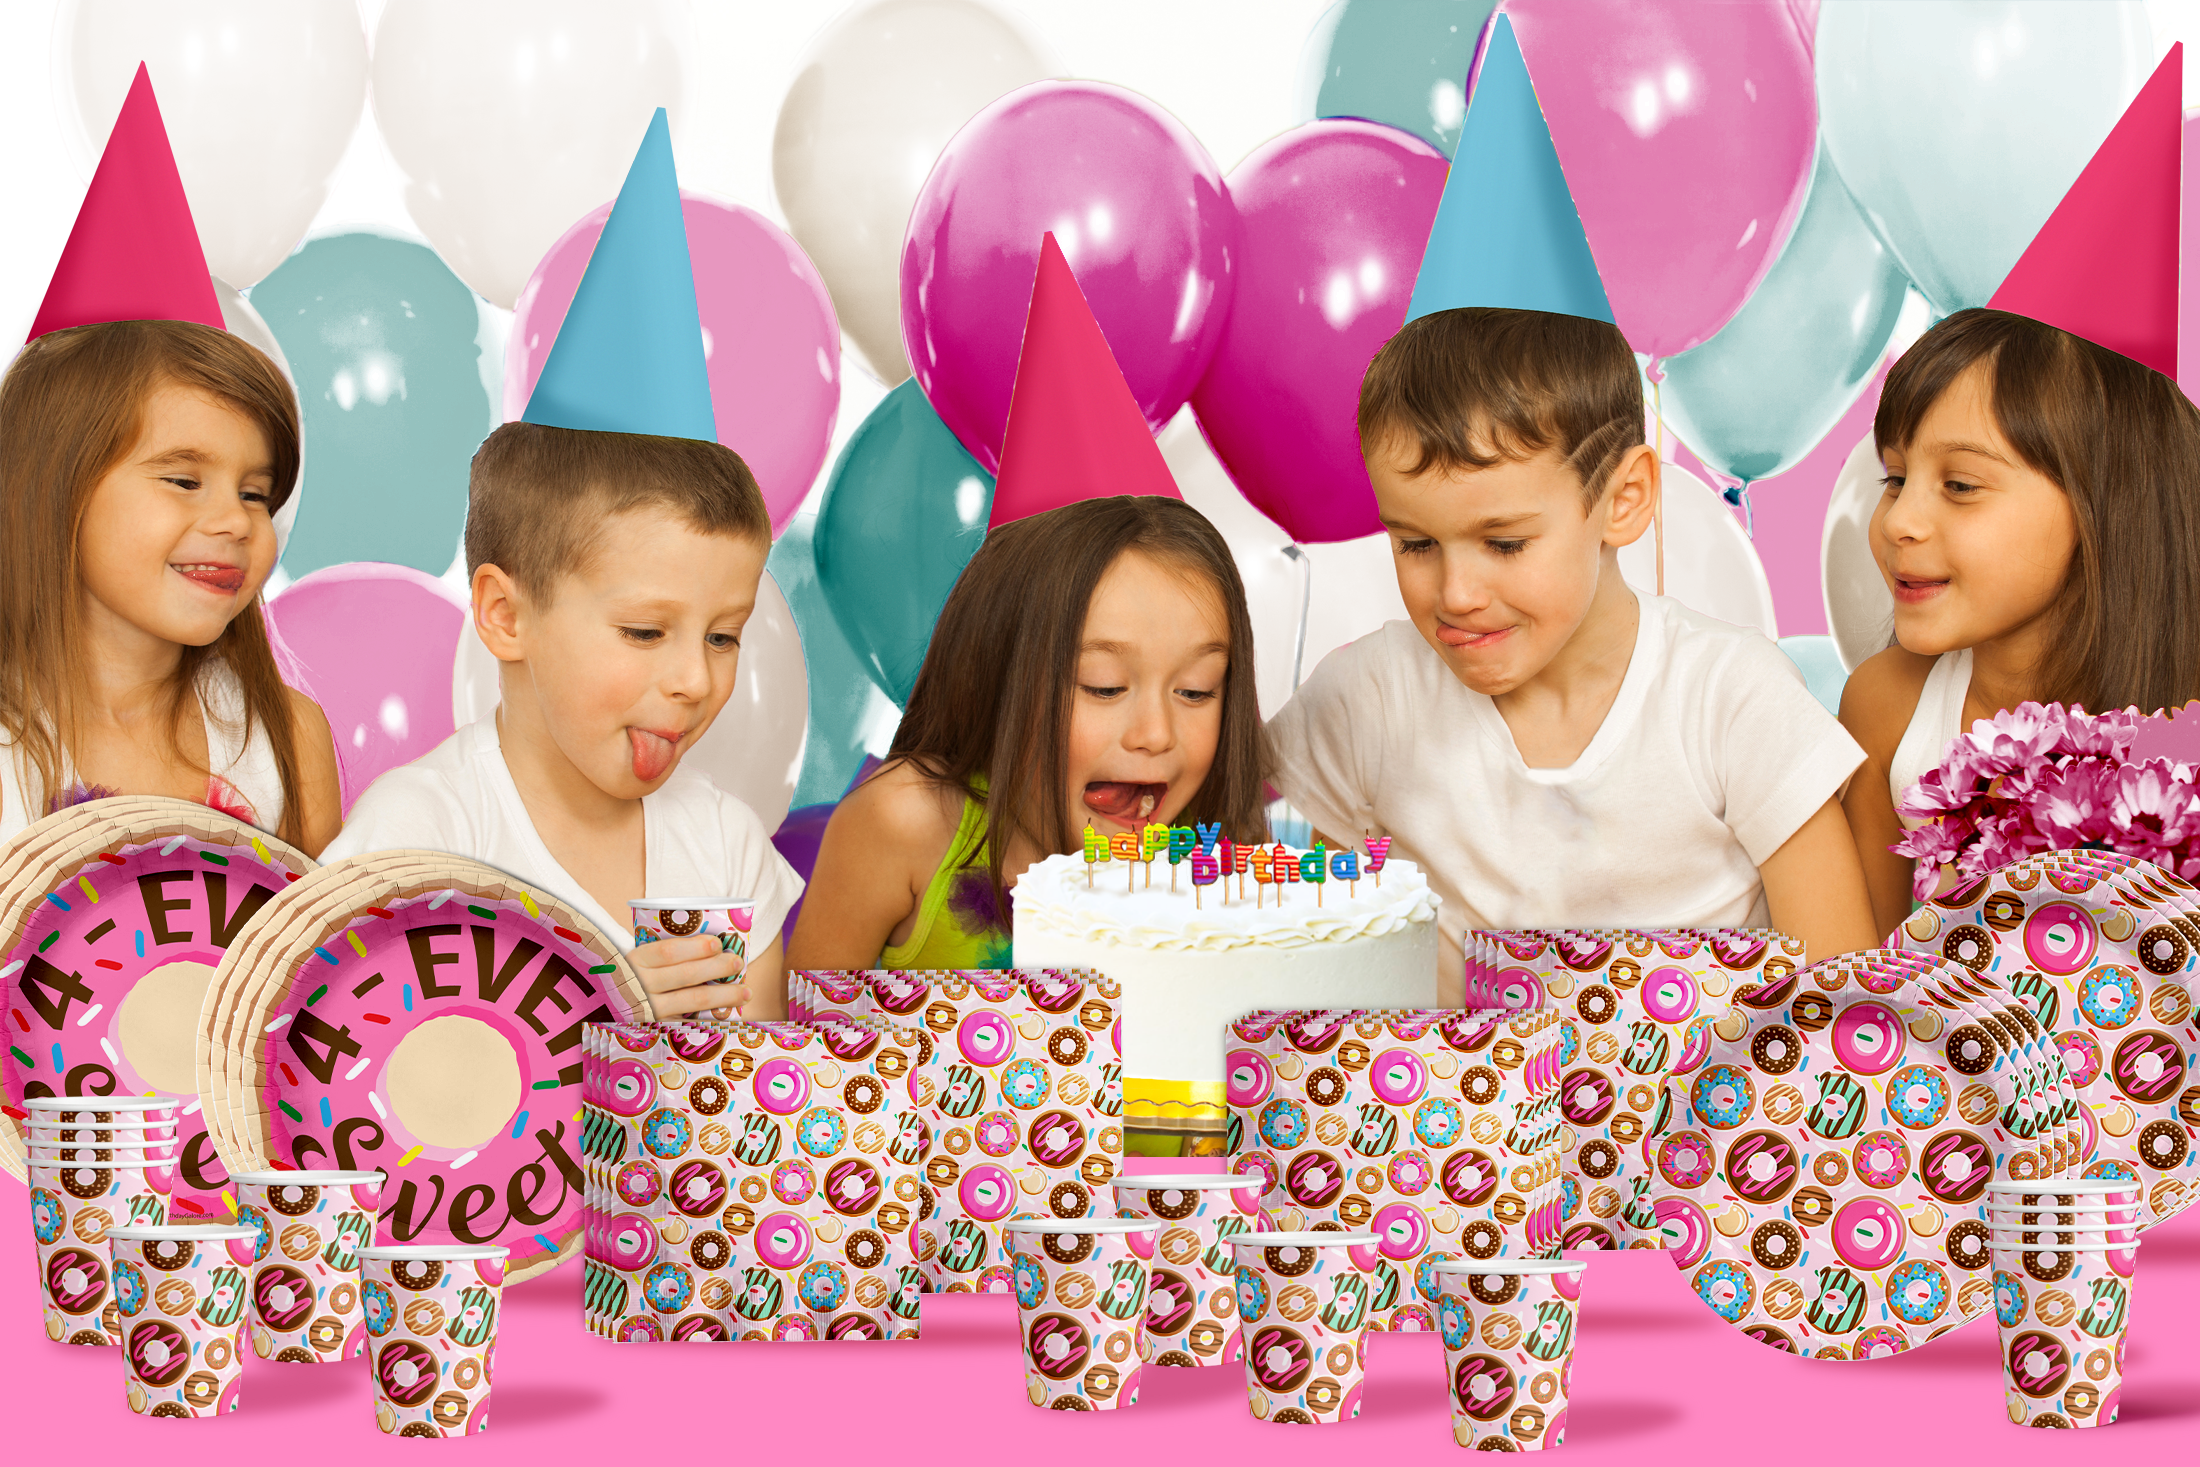 Girls 4th Birthday Party Supplies - Fourever Sweet Donut Birthday Paper Plates - 64 Piece Tableware Set Includes Large 9" Paper Plates Dessert Plates, Cups and Napkins Kit for 16